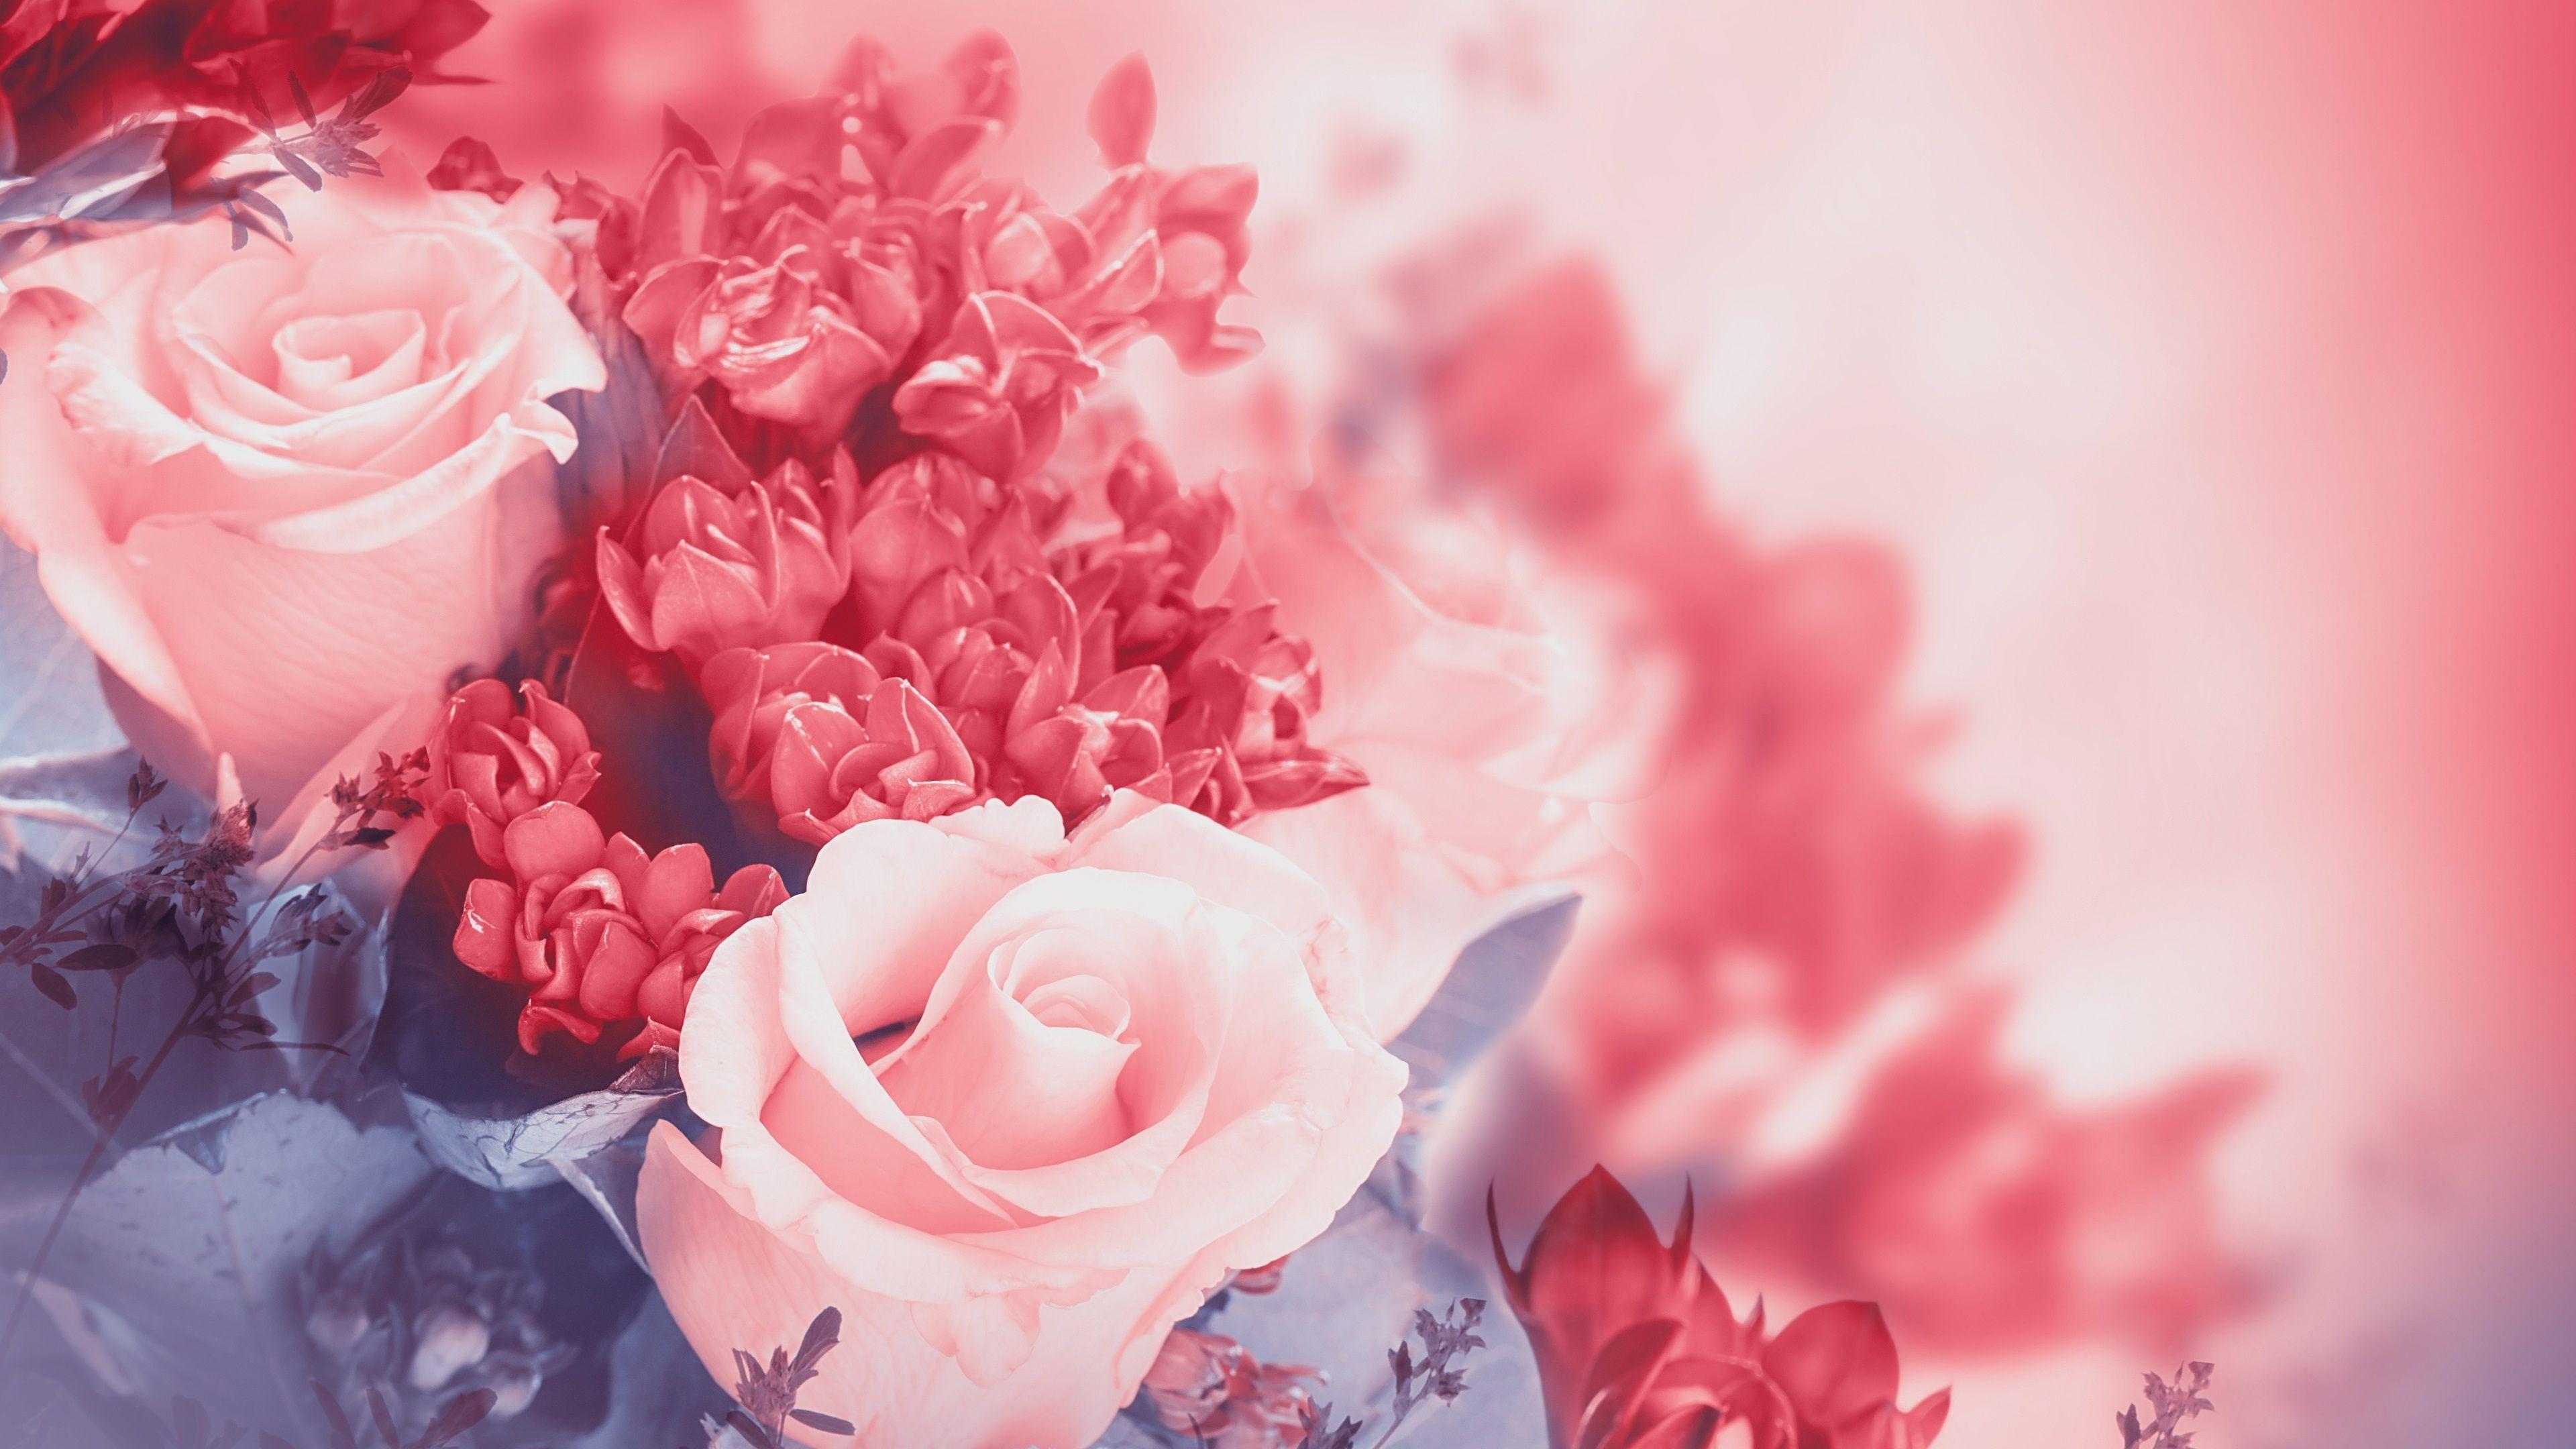 Wallpaper Pink flowers, rose, petals, buds 3840x2160 UHD 4K Picture